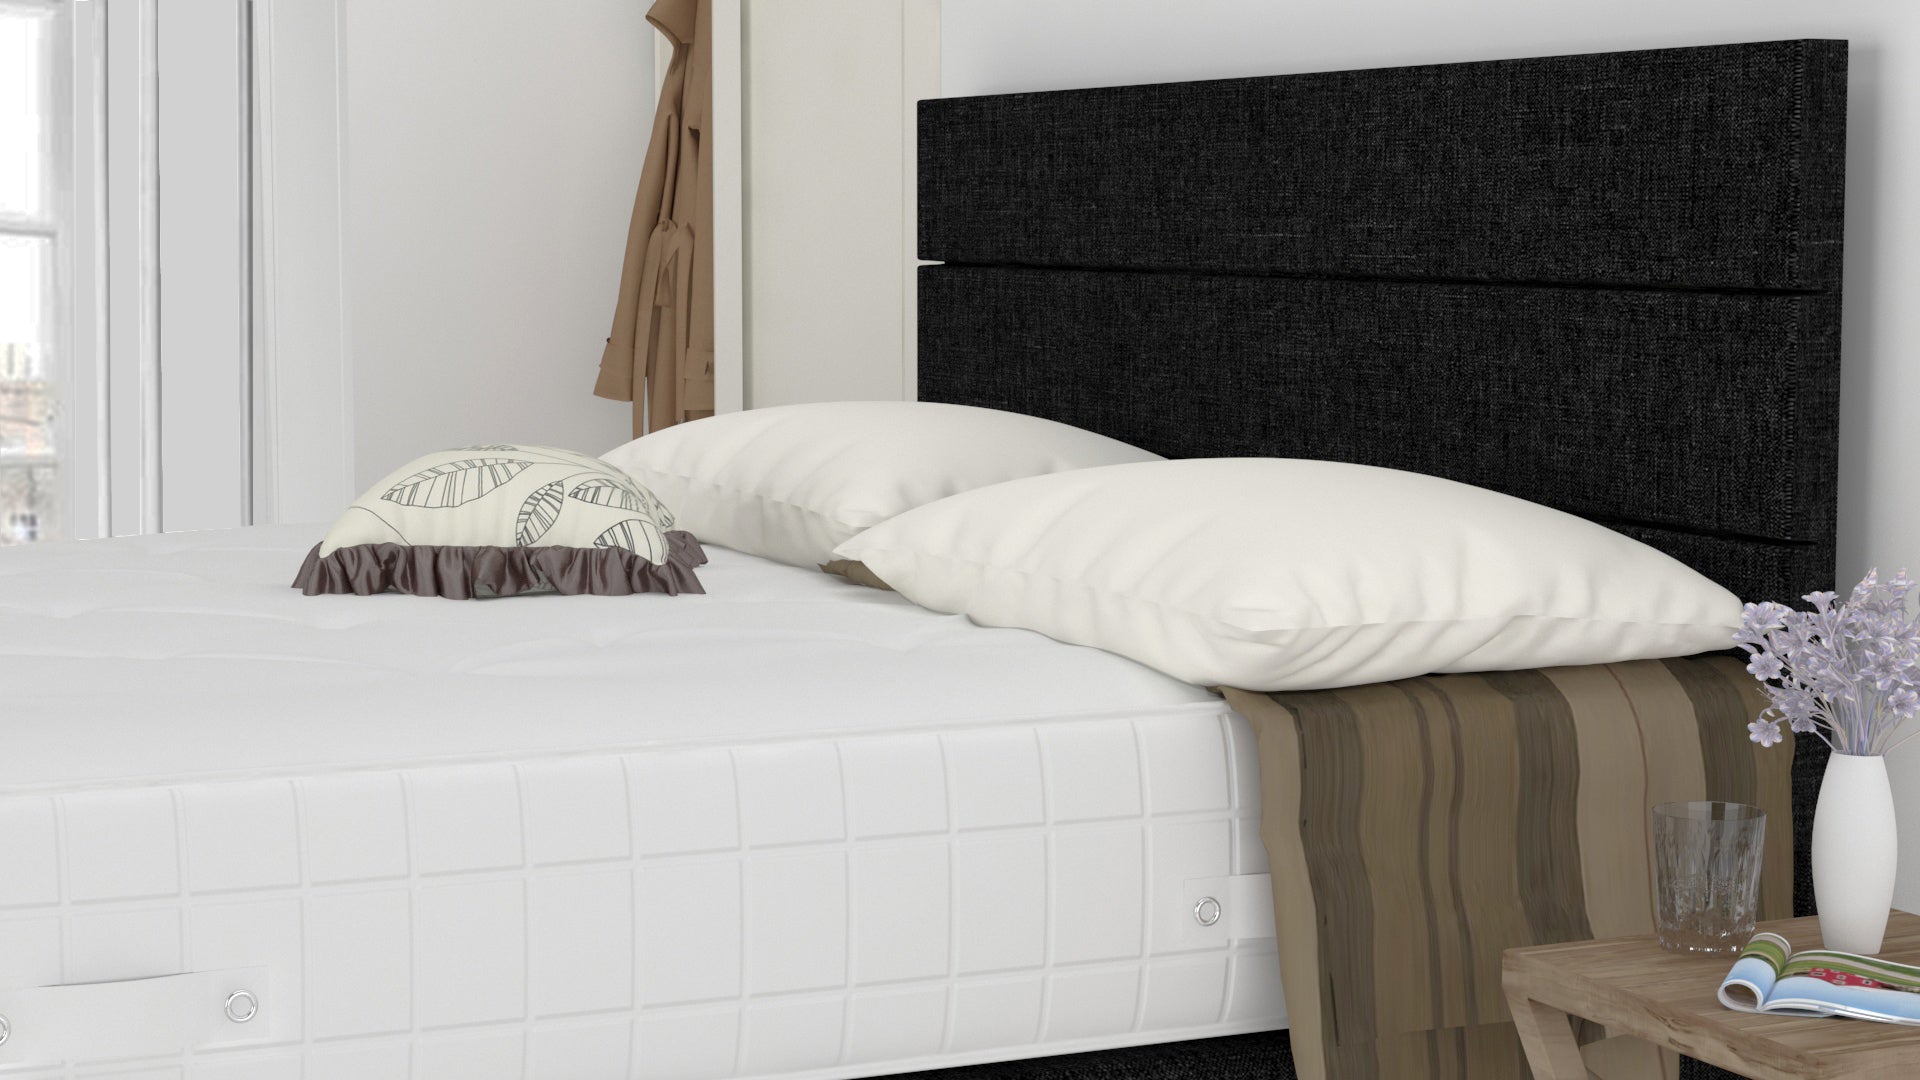 Black Venice 5 Feet Divan Bed Set With 3 Panel Headboard (Included Feet) And Free Pocket Sprung Mattress